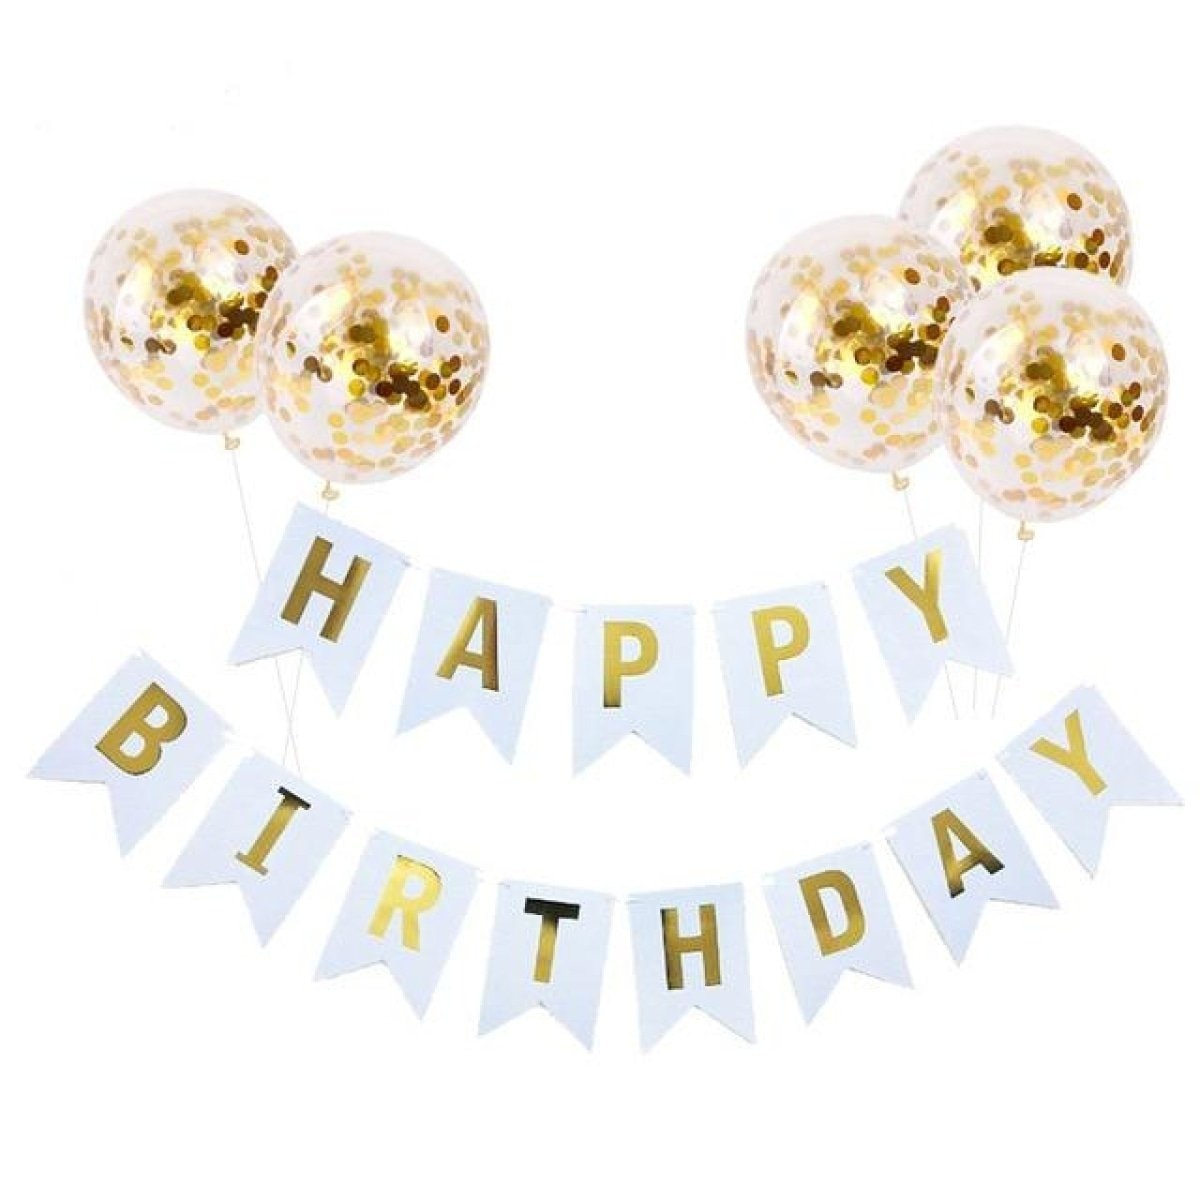 Happy Birthday Balloon Banner Set Confetti Balloons Party Decorations Boy Girl | G | Asia Sell